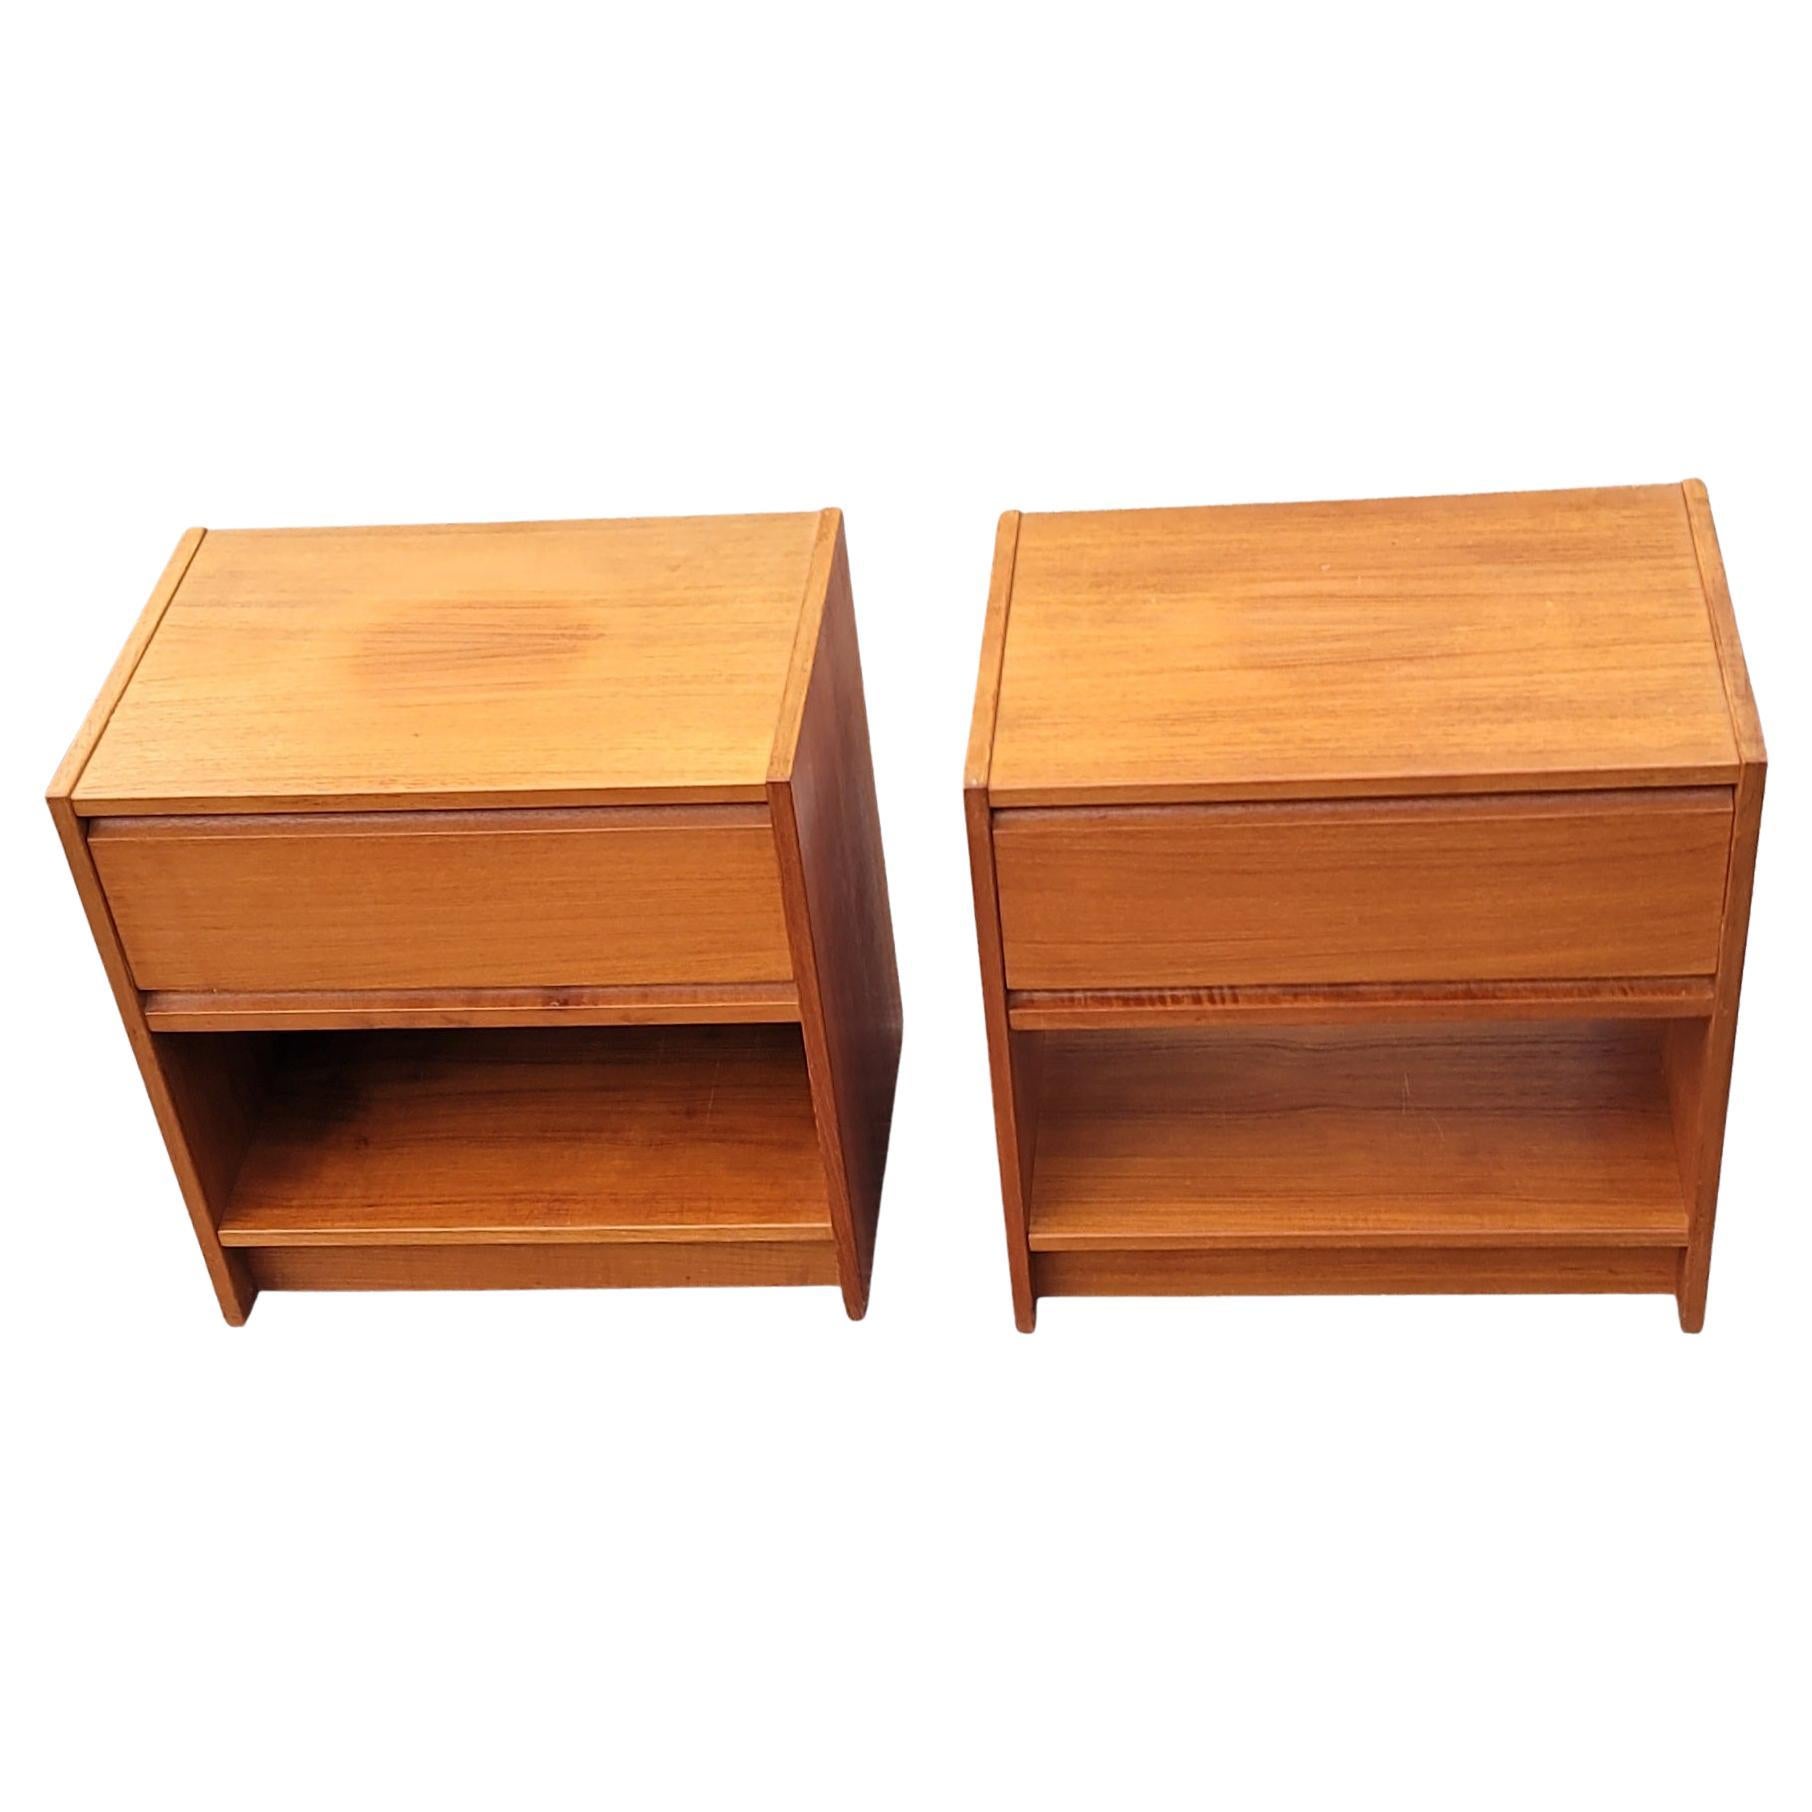 A pair of Vintage Danish Modern one drawer teak nightstands with dovetailed drawer joinery. 
Good vintage condition. Measure 13.75